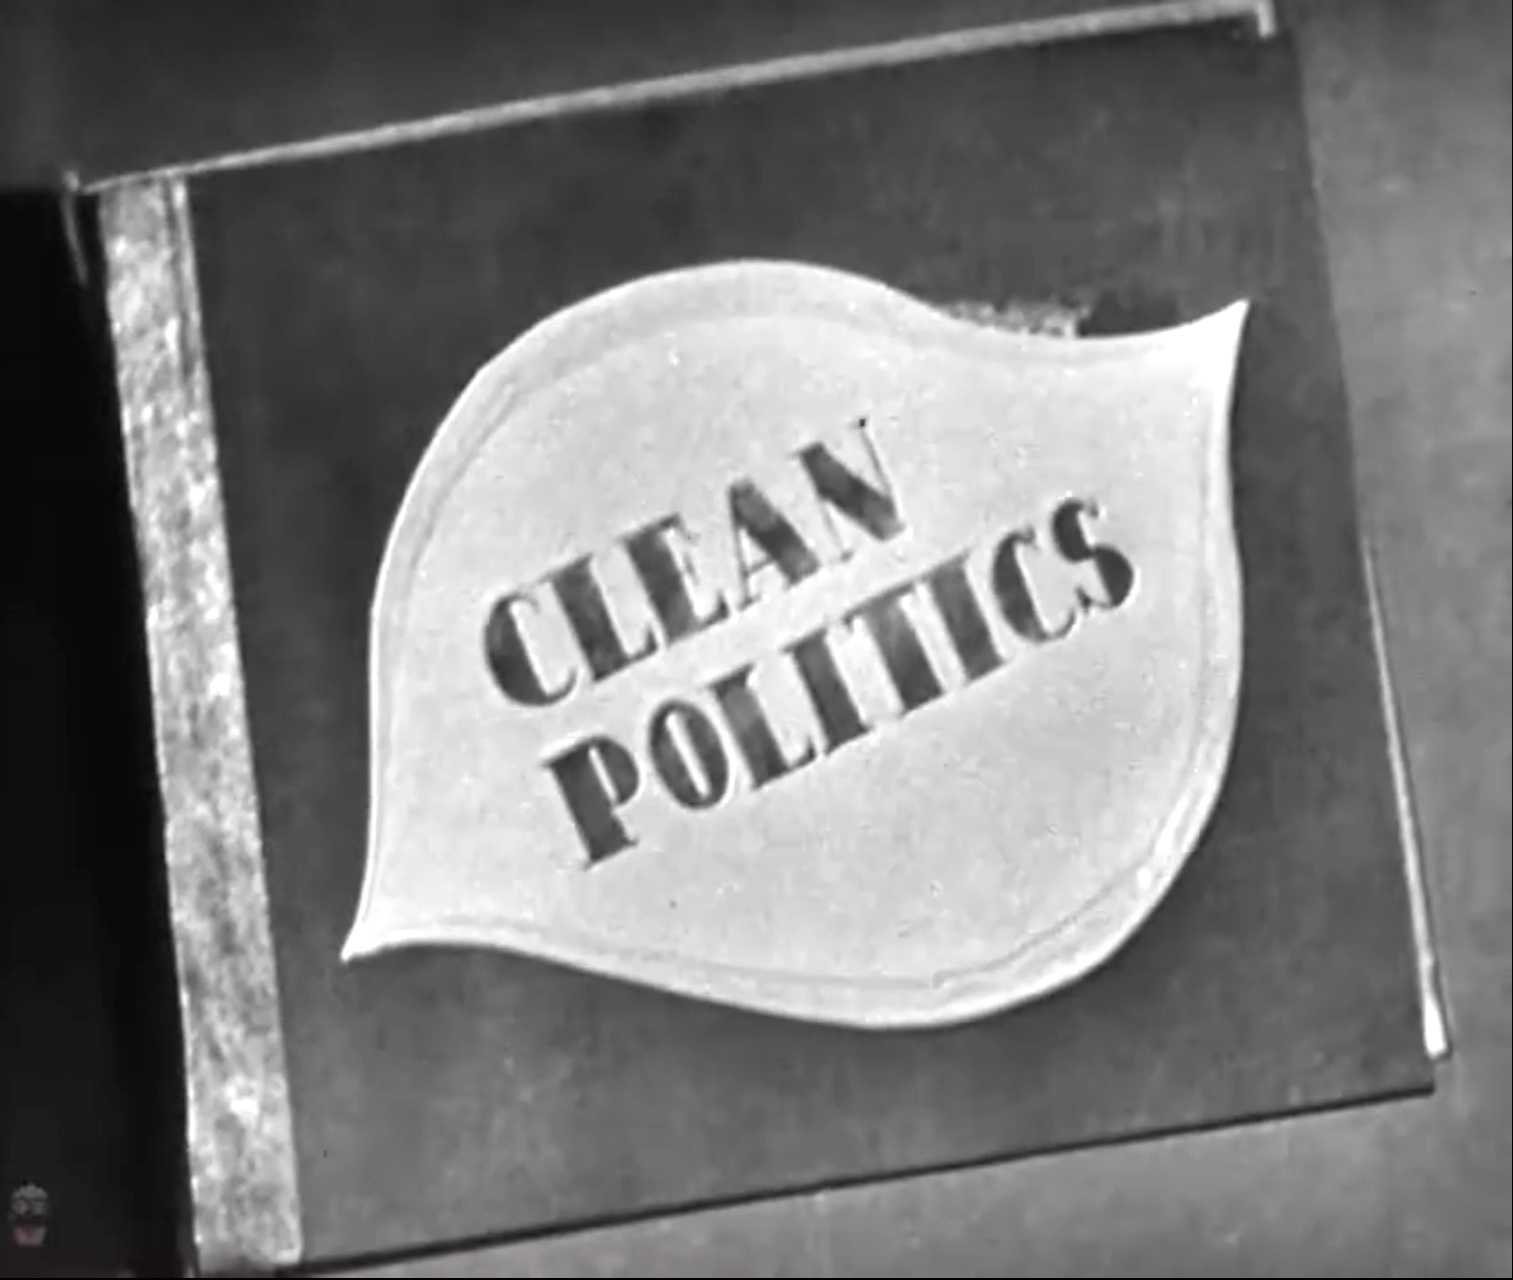 Clean Politics - The Red Skelton Show, season 1- with Clem Kadiddlehopper, Willie Lump Lump, and San Fernando Red